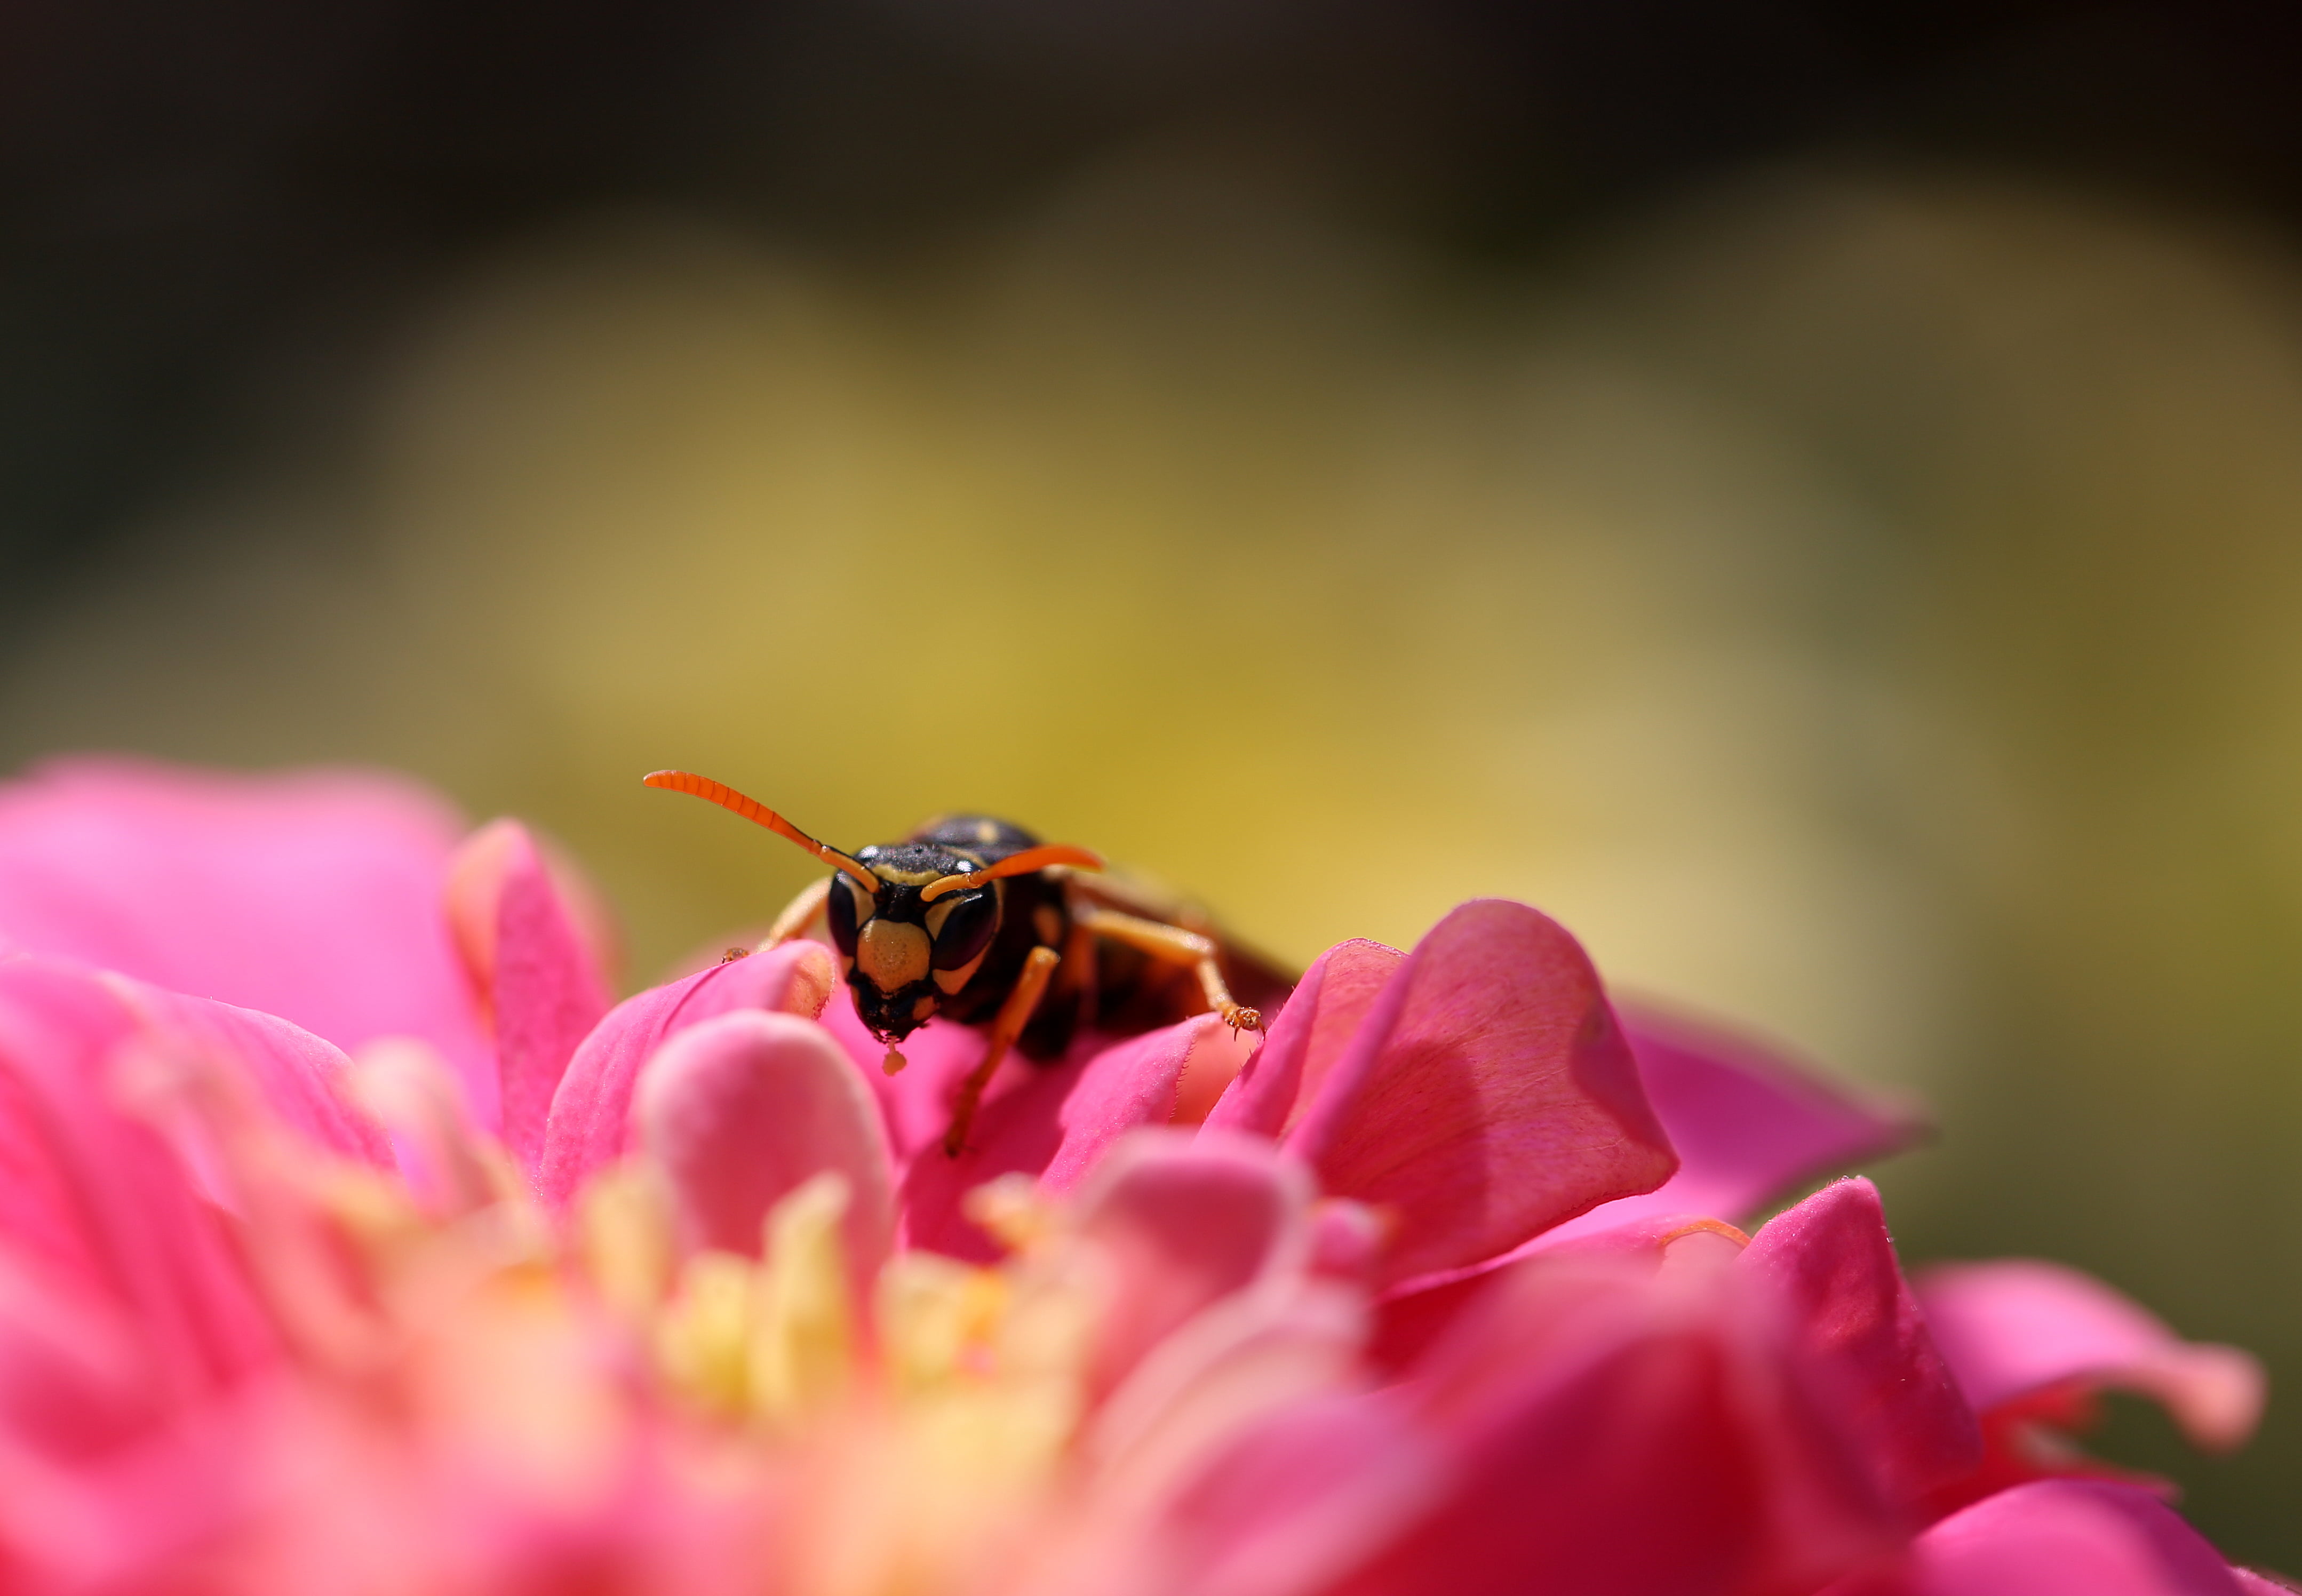 Yellow Jacket Wasp perched on purple petaled flower in closeup photography